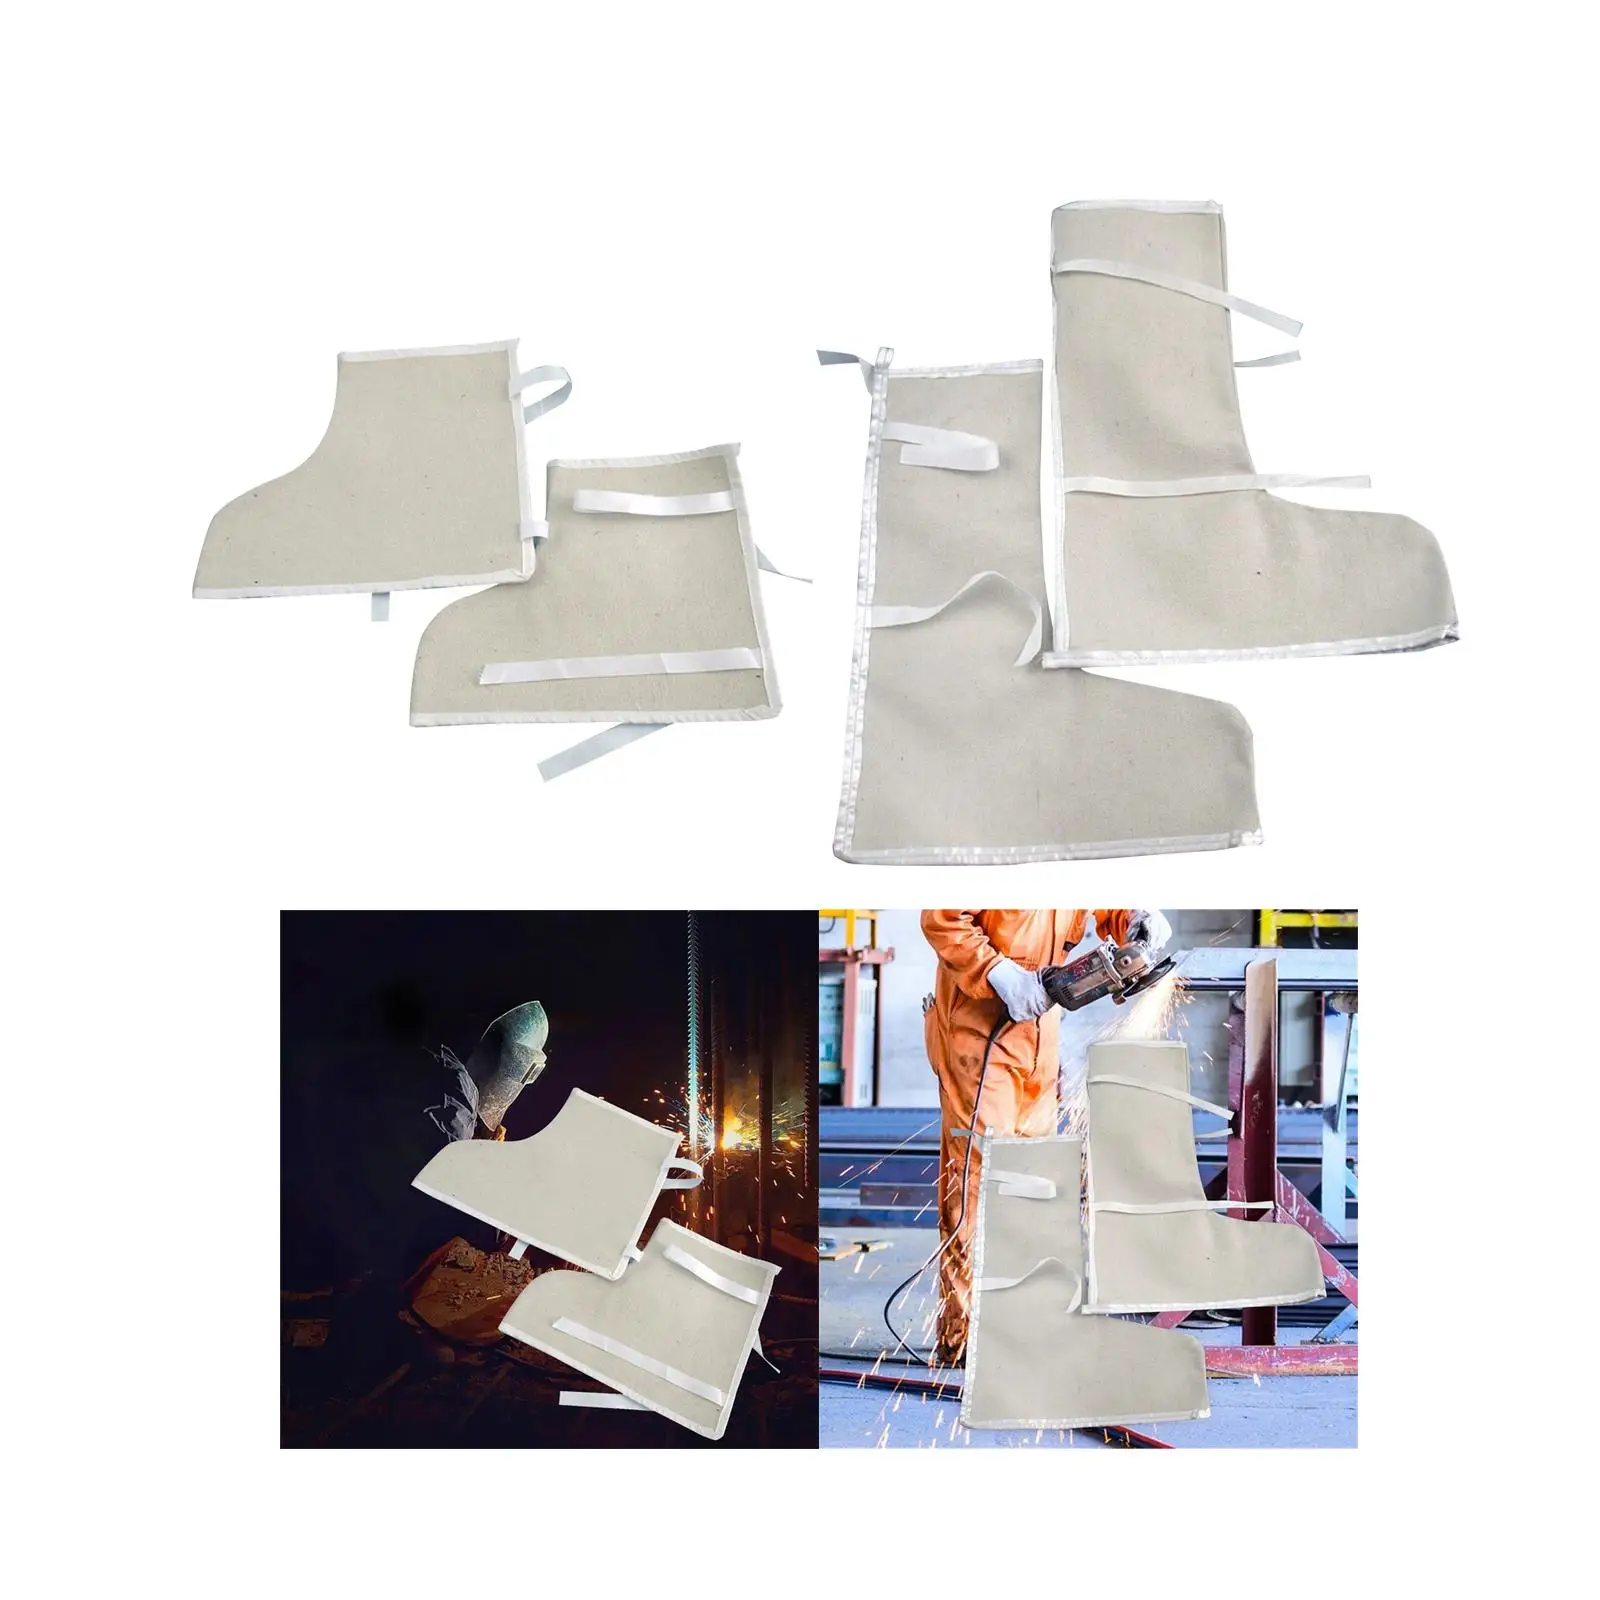 2Pcs Welding Shoe Covers Multipurpose Canvas Heat and Abrasion Resistant Welder Protective Foot Covers Welding Spats for Welding